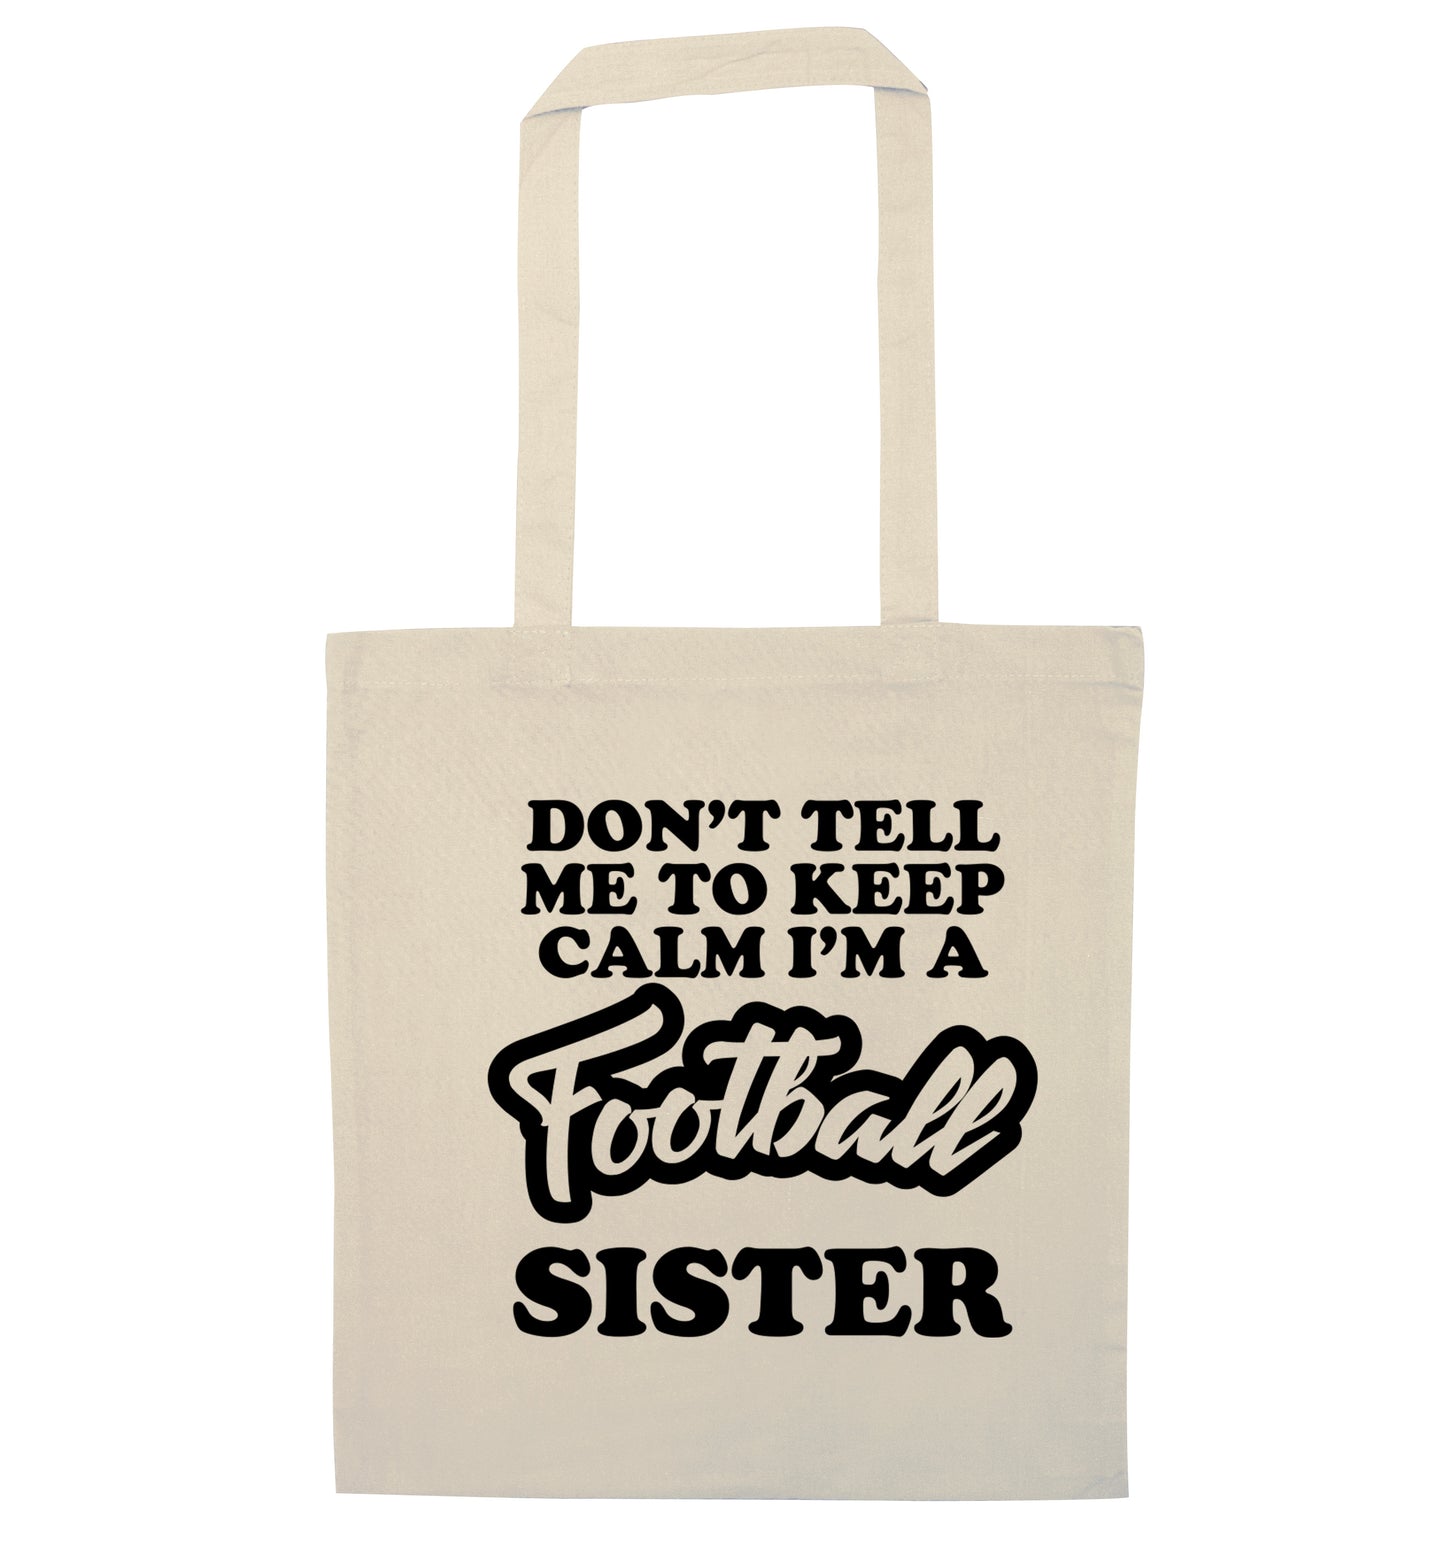 Don't tell me to keep calm I'm a football sister natural tote bag